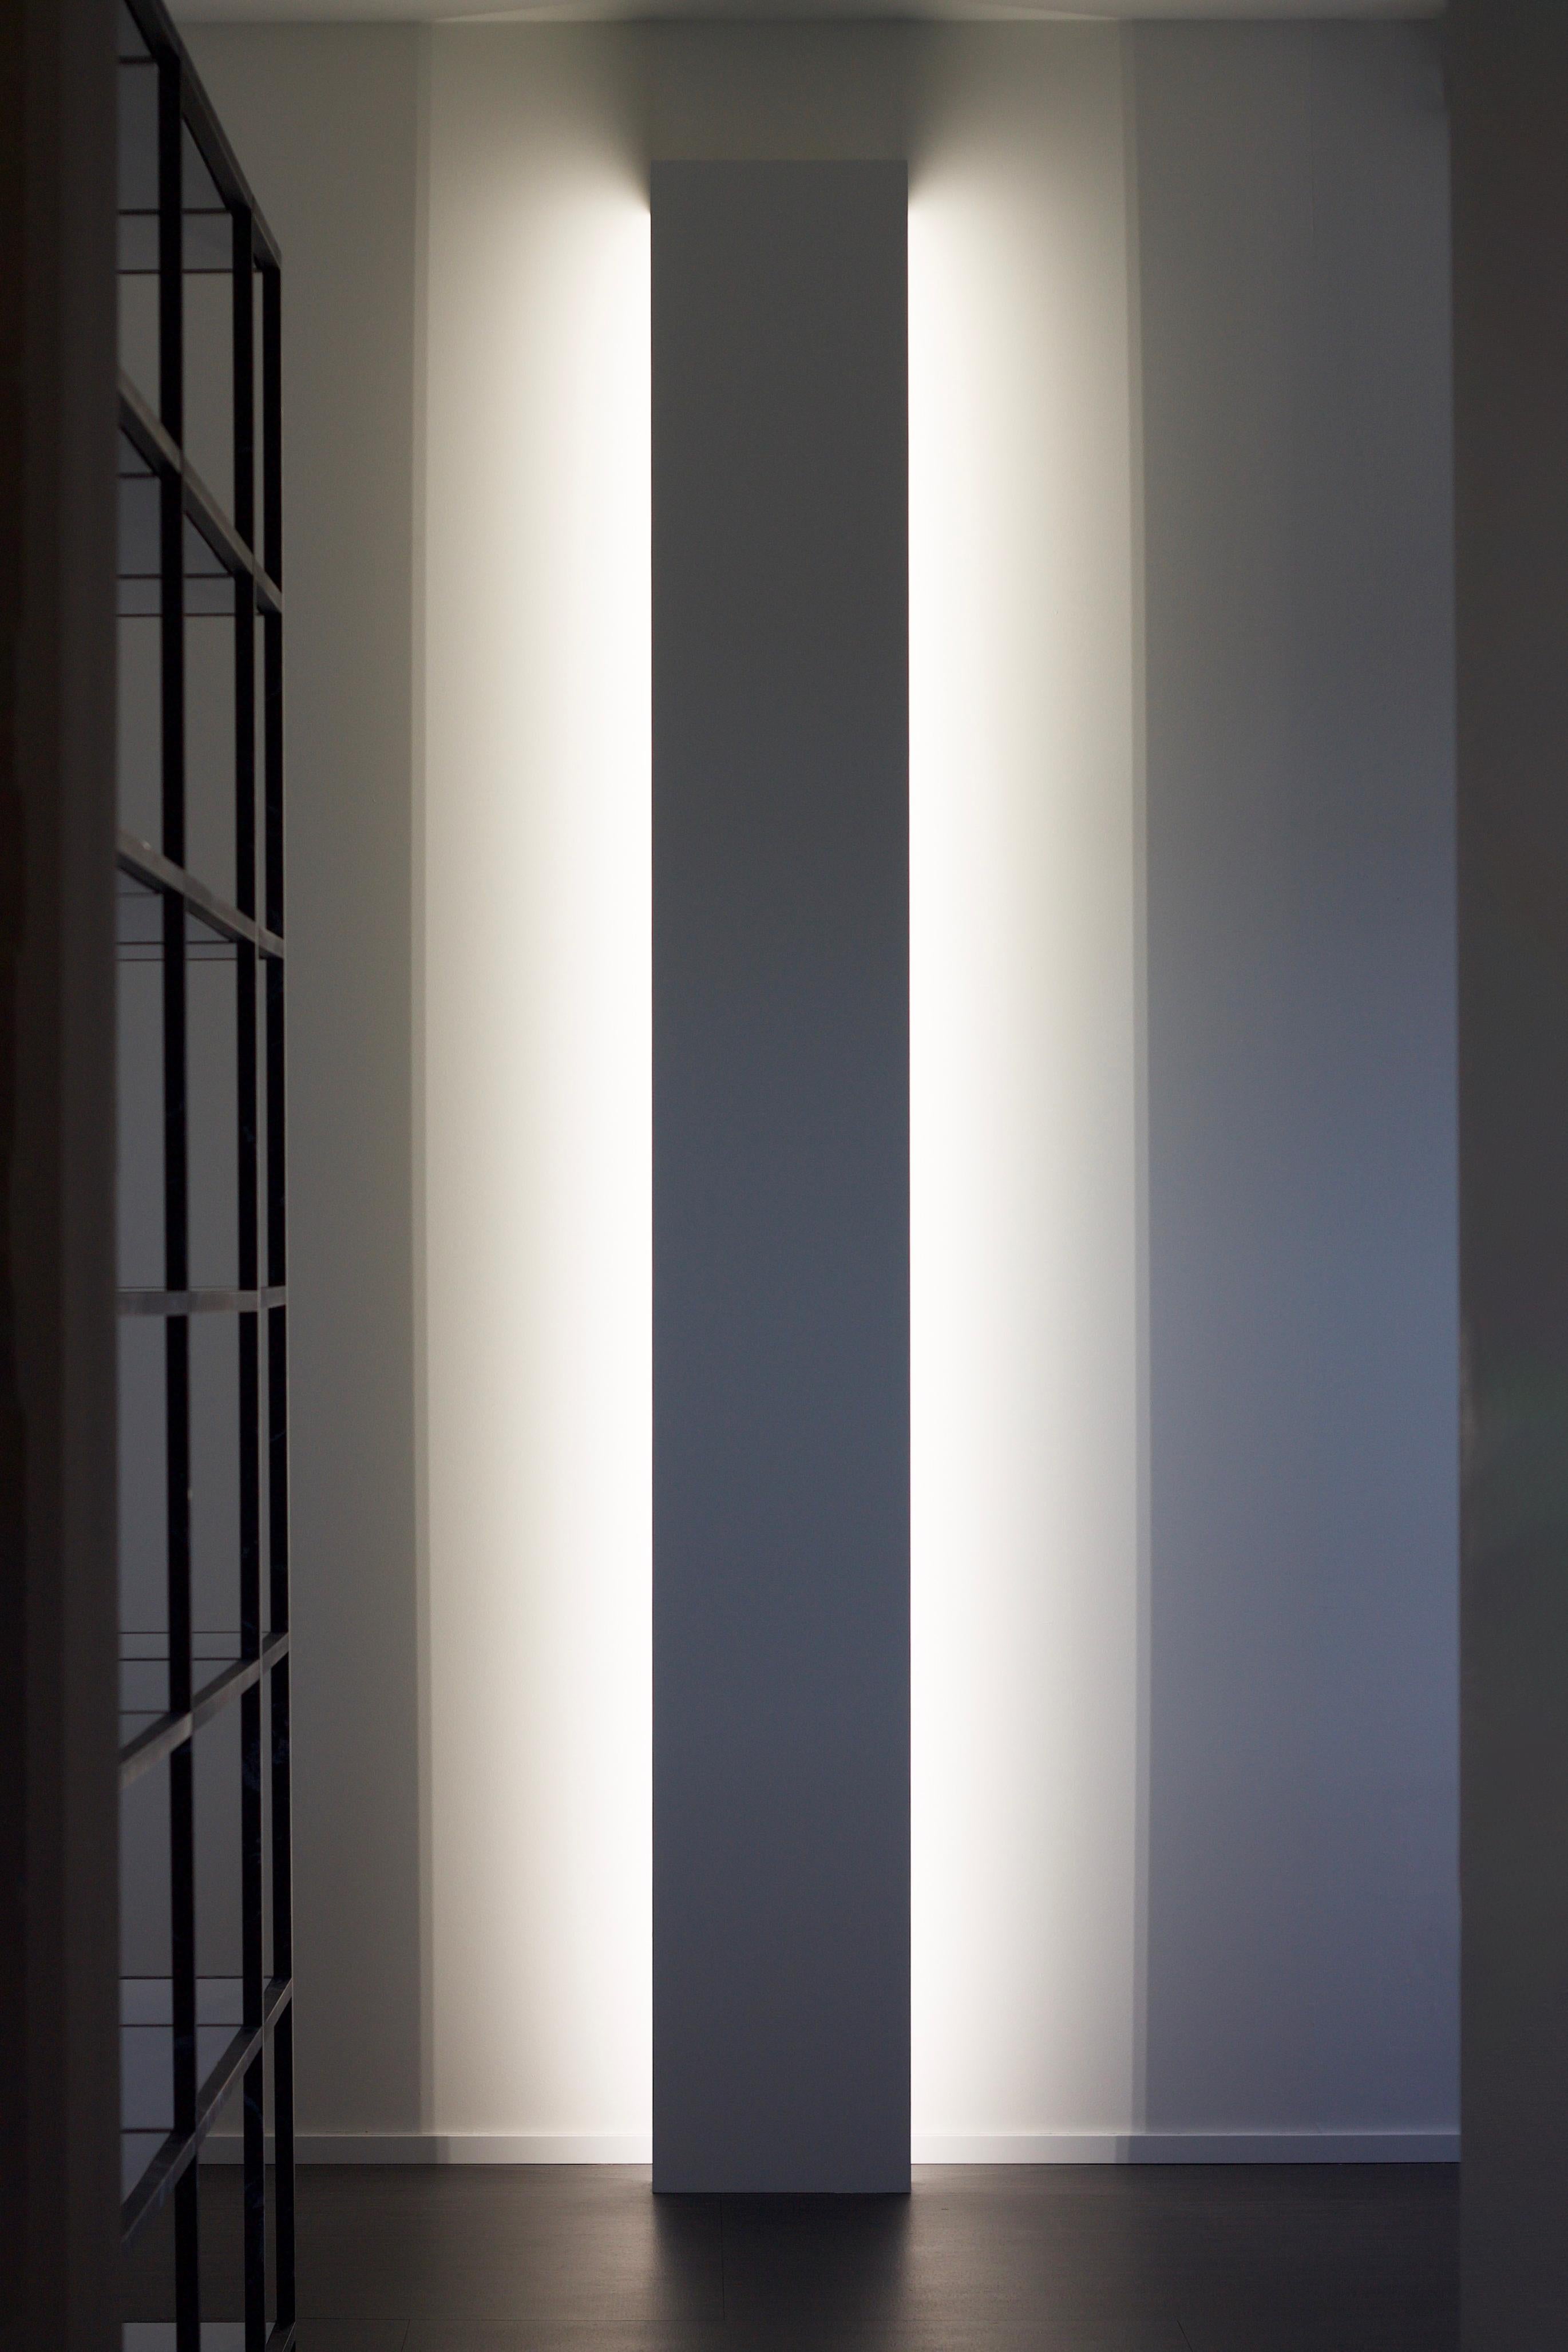 A unique design in its simplicity. Tall, stunning, impressive, capable of turning any corridor into a scenic passage or to create a sequence of depths and lights when used in sequence in a larger space. The LED lights will cast firm shadows and